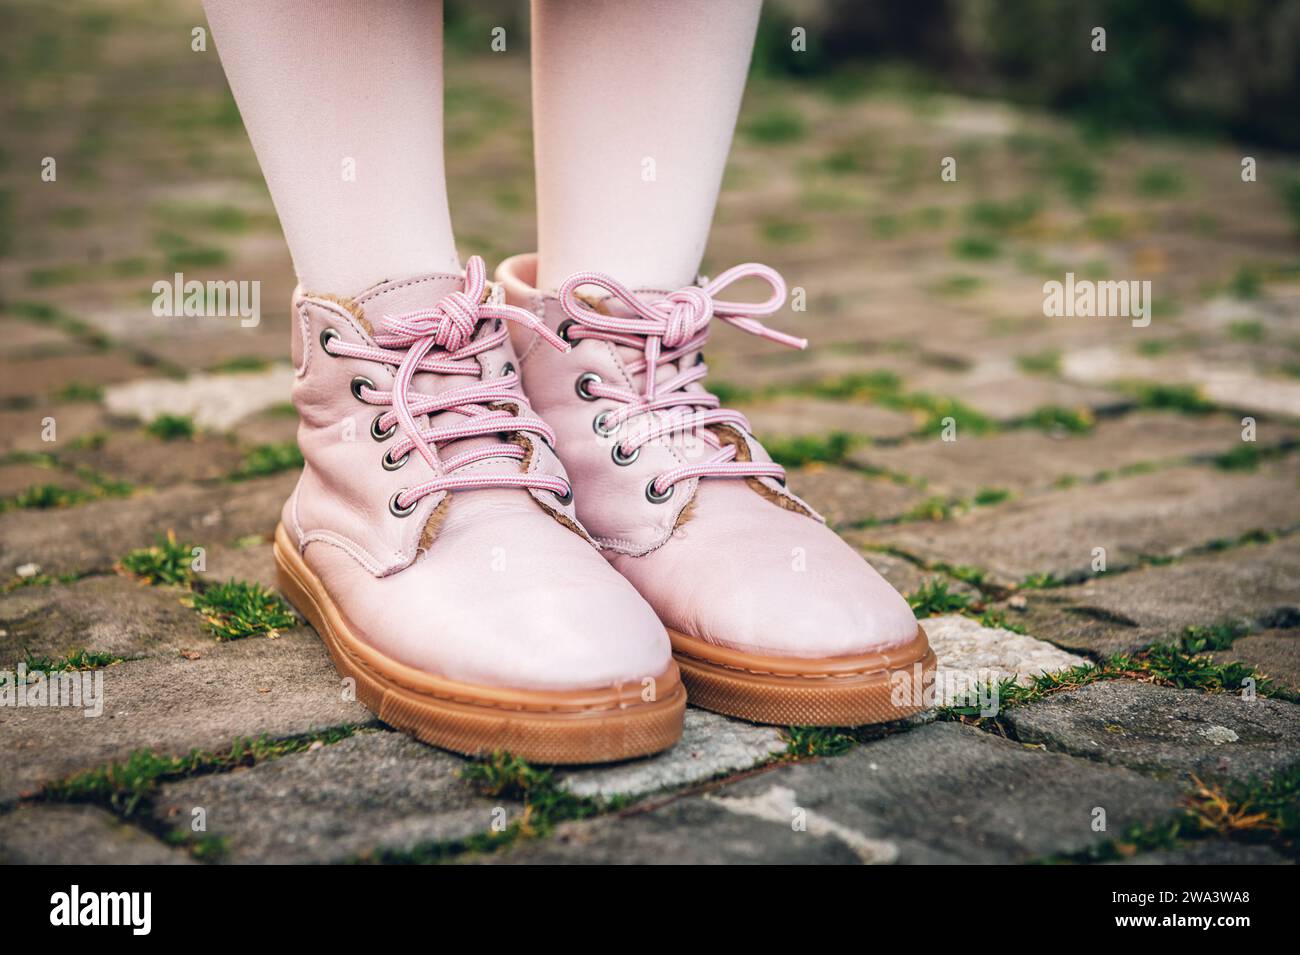 Fashion pink shoes on kid's feet Stock Photo